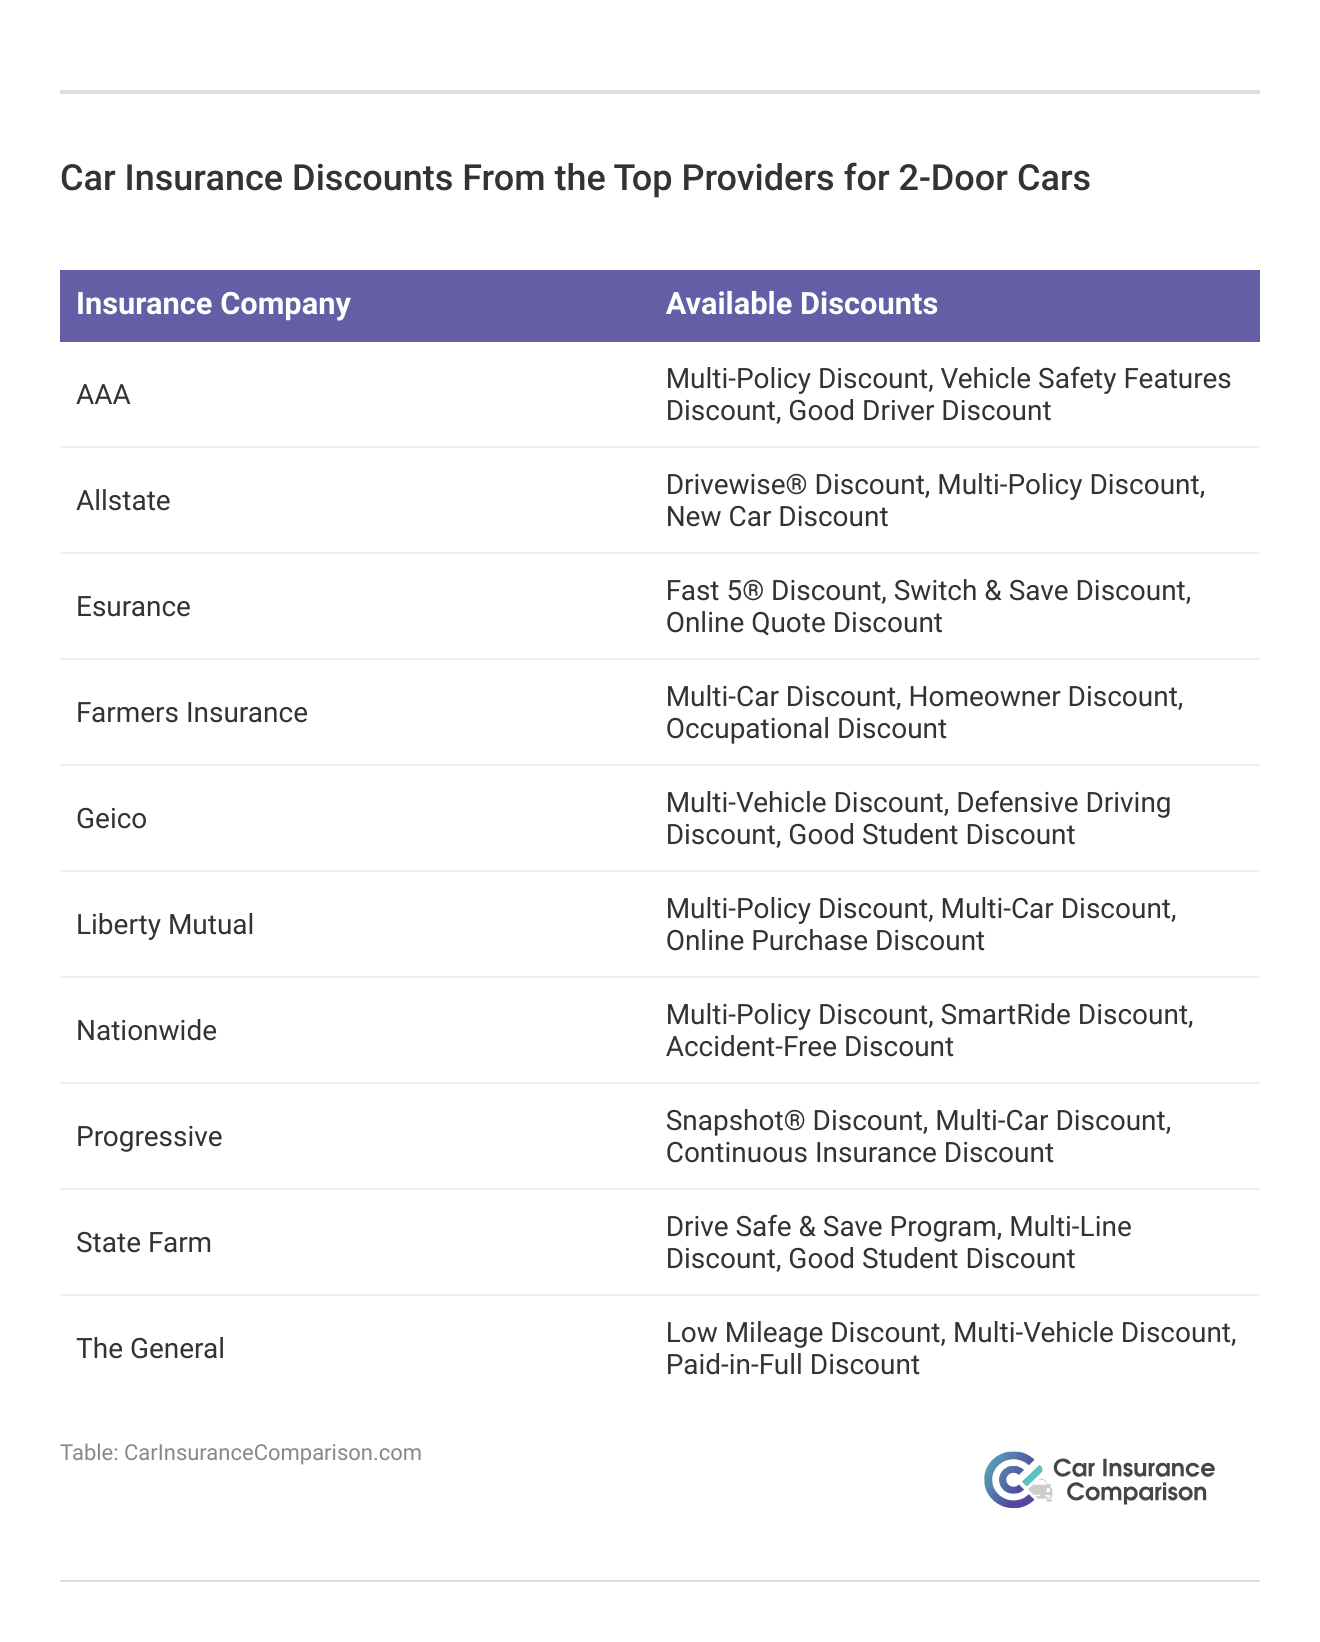 <h3>Car Insurance Discounts From the Top Providers for 2-Door Cars </h3>